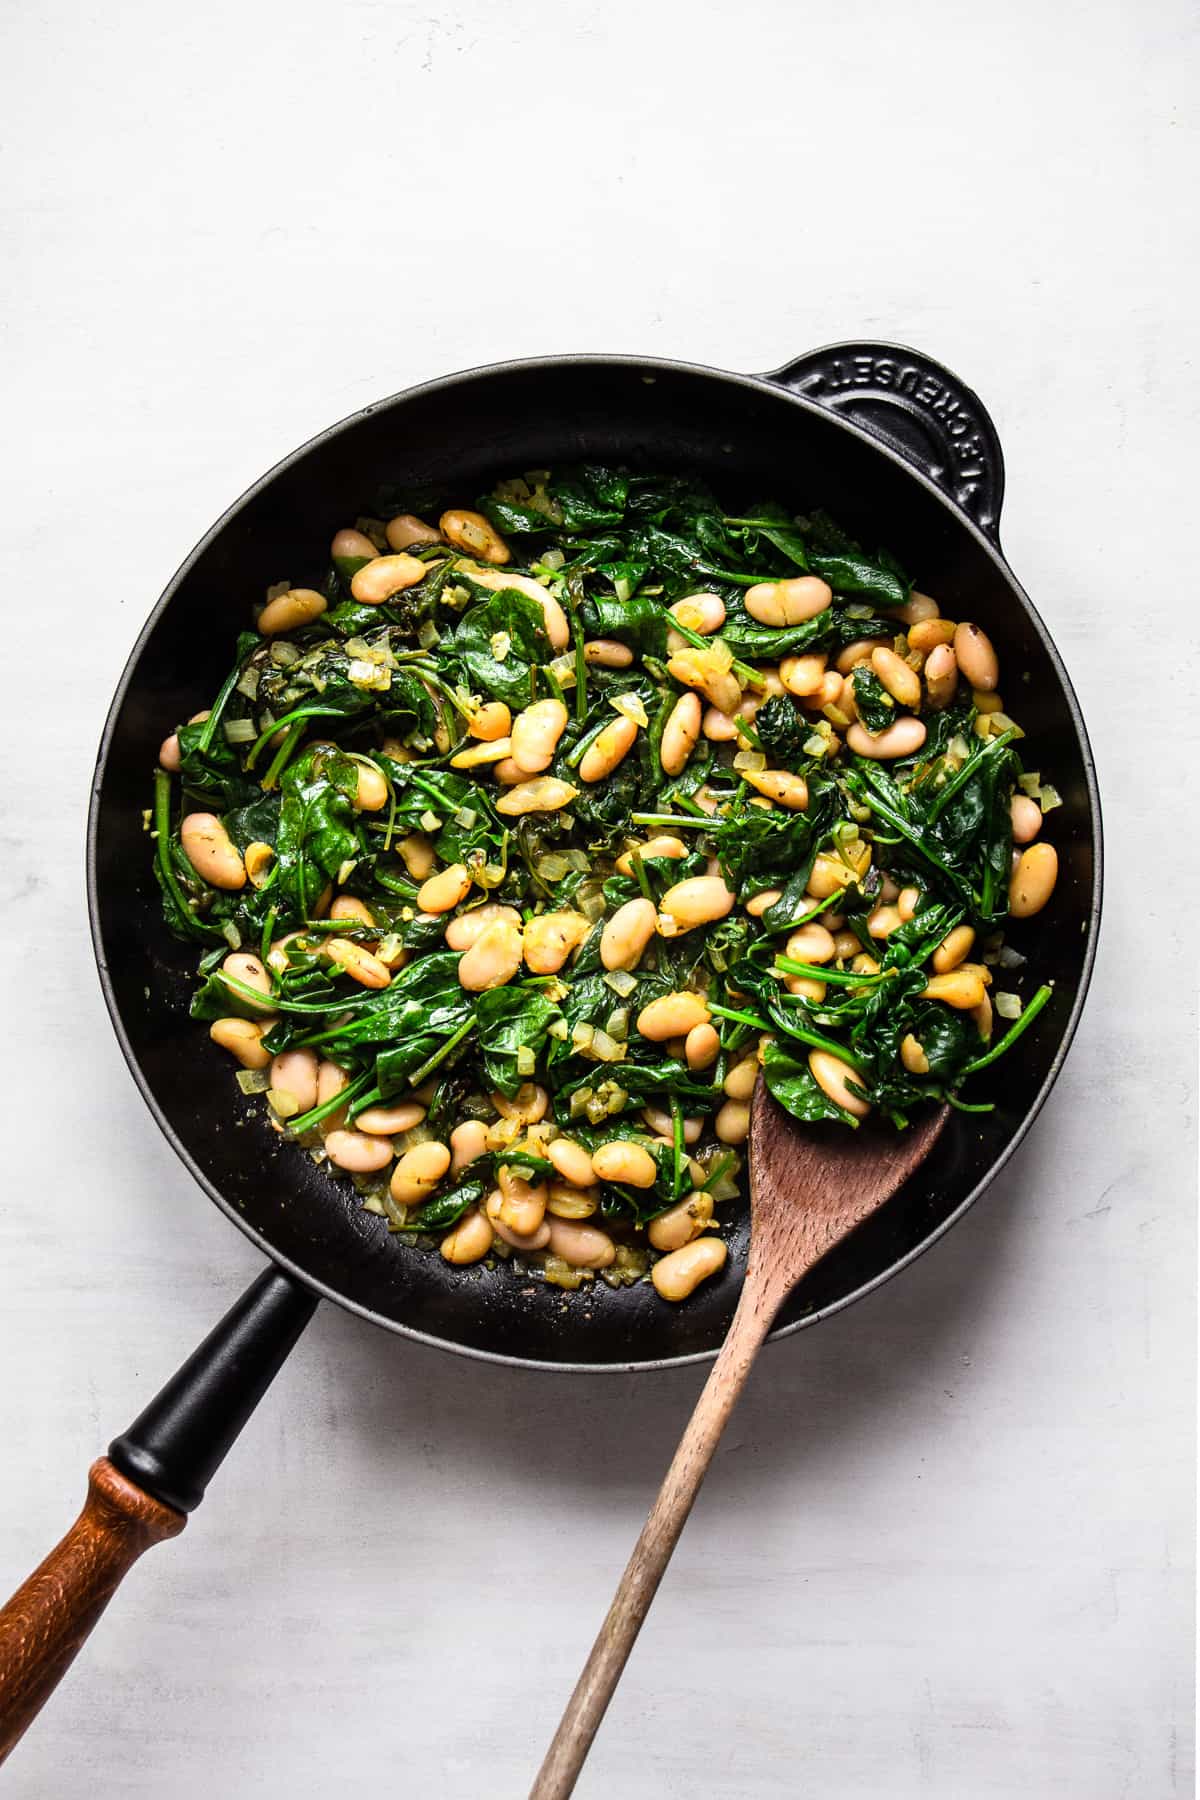 White beans and cooked spinach in a black pan with wooden handle.